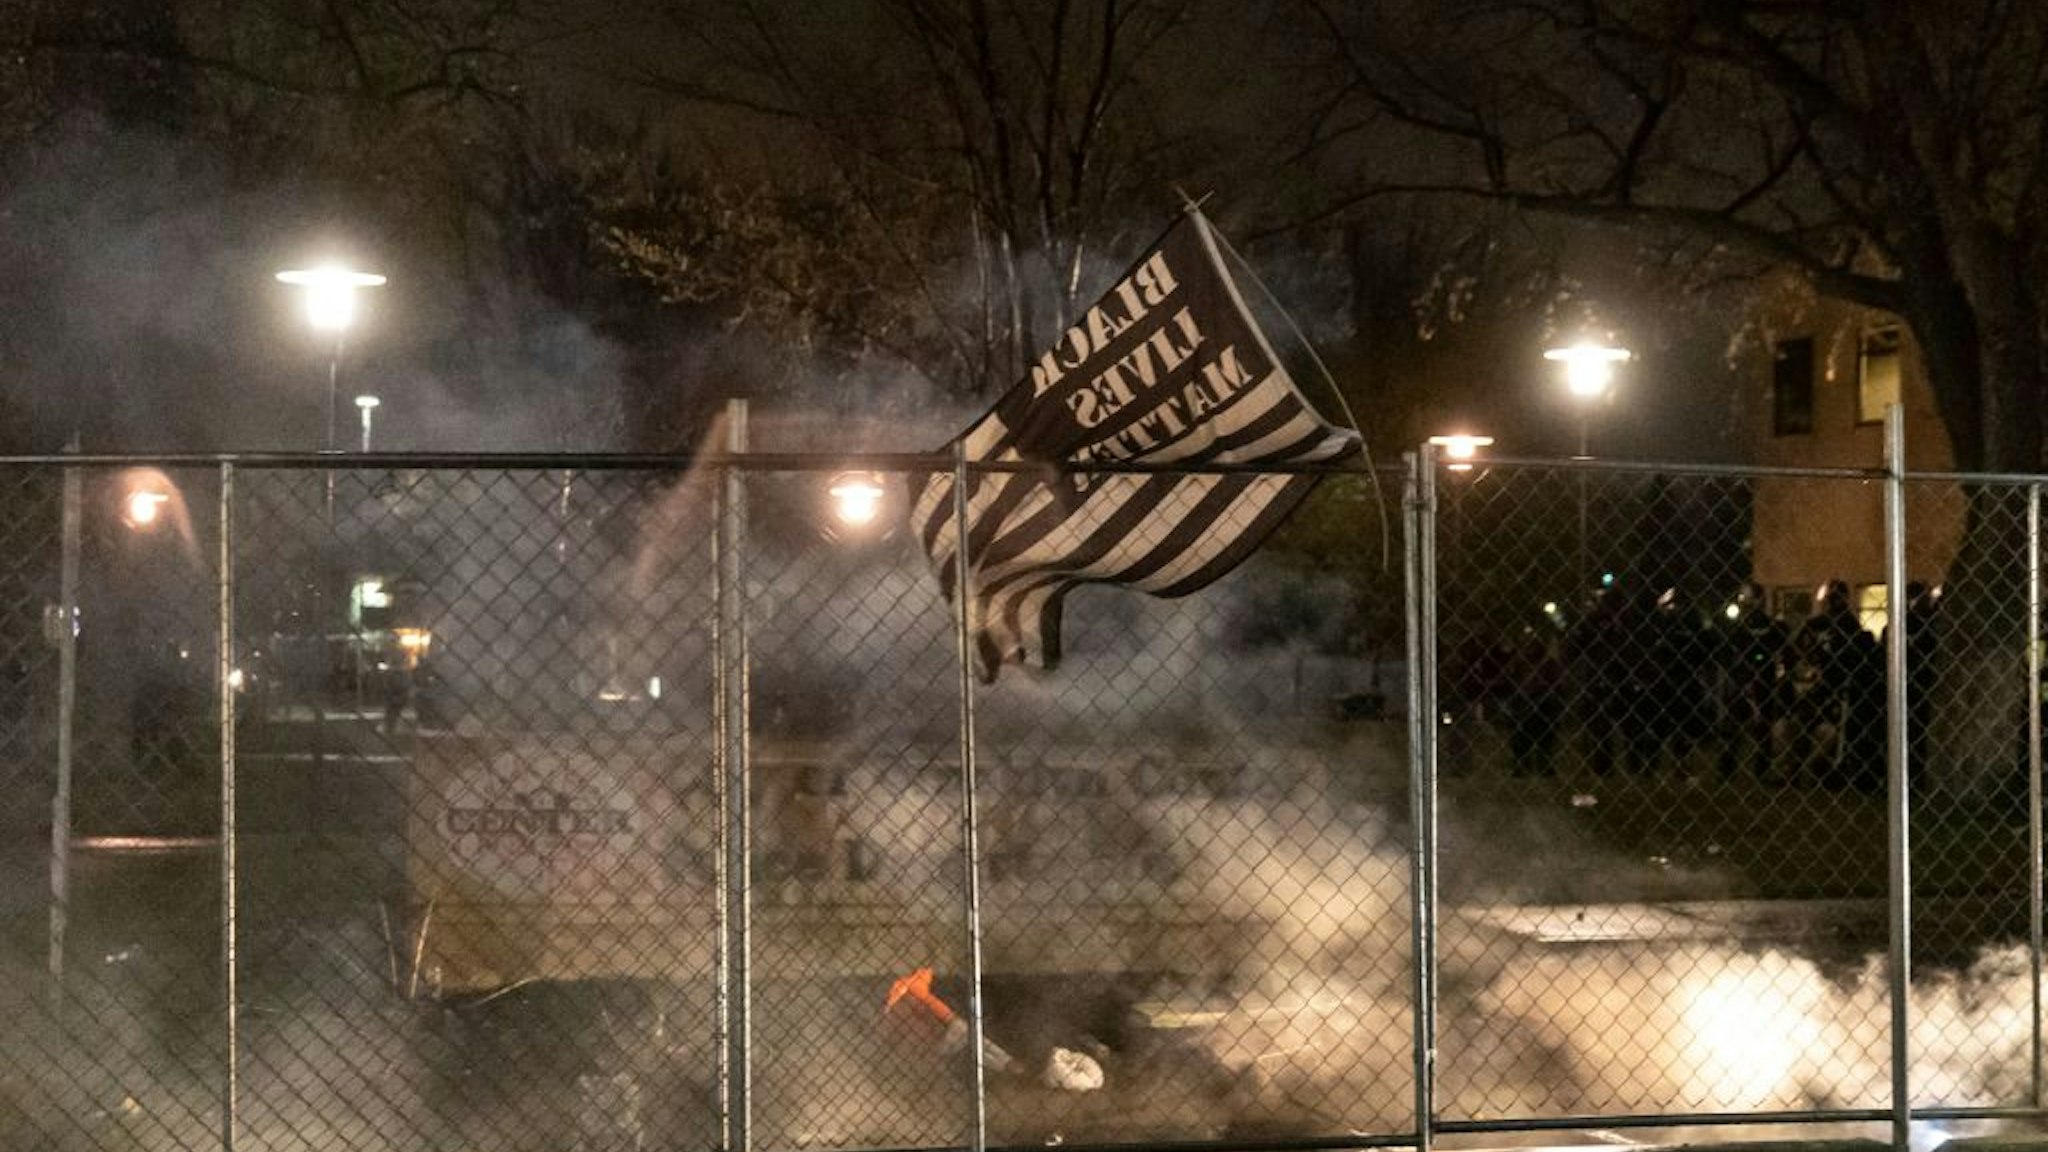 A Black Lives Matter flag is seen after curfew as demonstrators protest the death of Daunte Wright who was shot and killed by a police officer in Brooklyn Center, Minnesota on April 12, 2021.